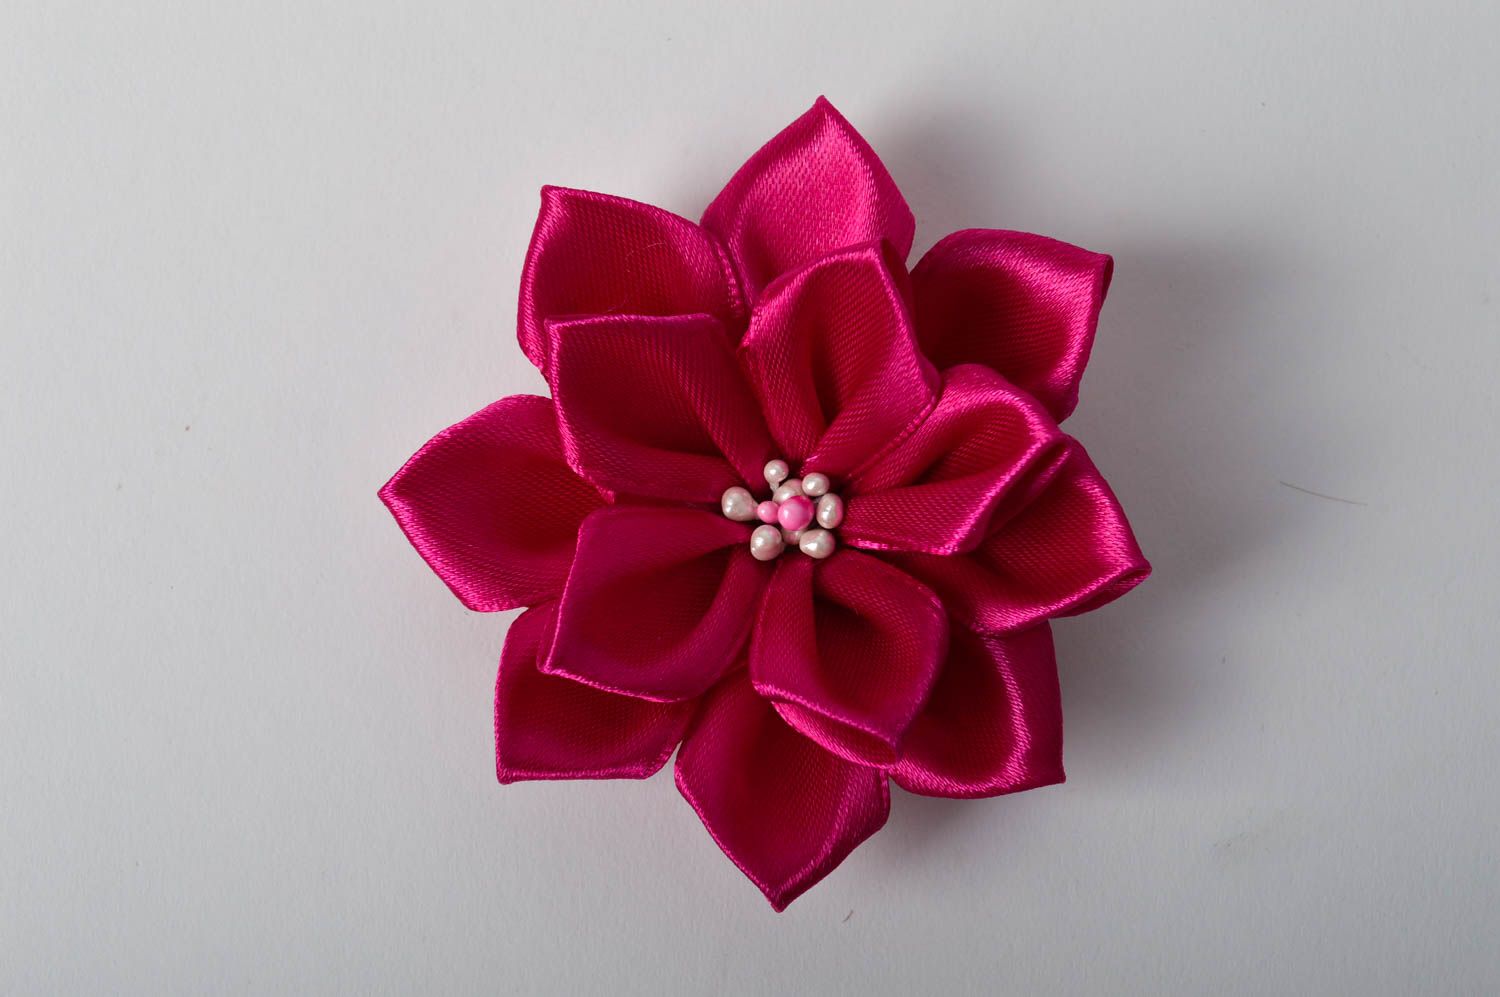 Stylish handmade flower brooch jewelry textile barrette hair clip gifts for her photo 4